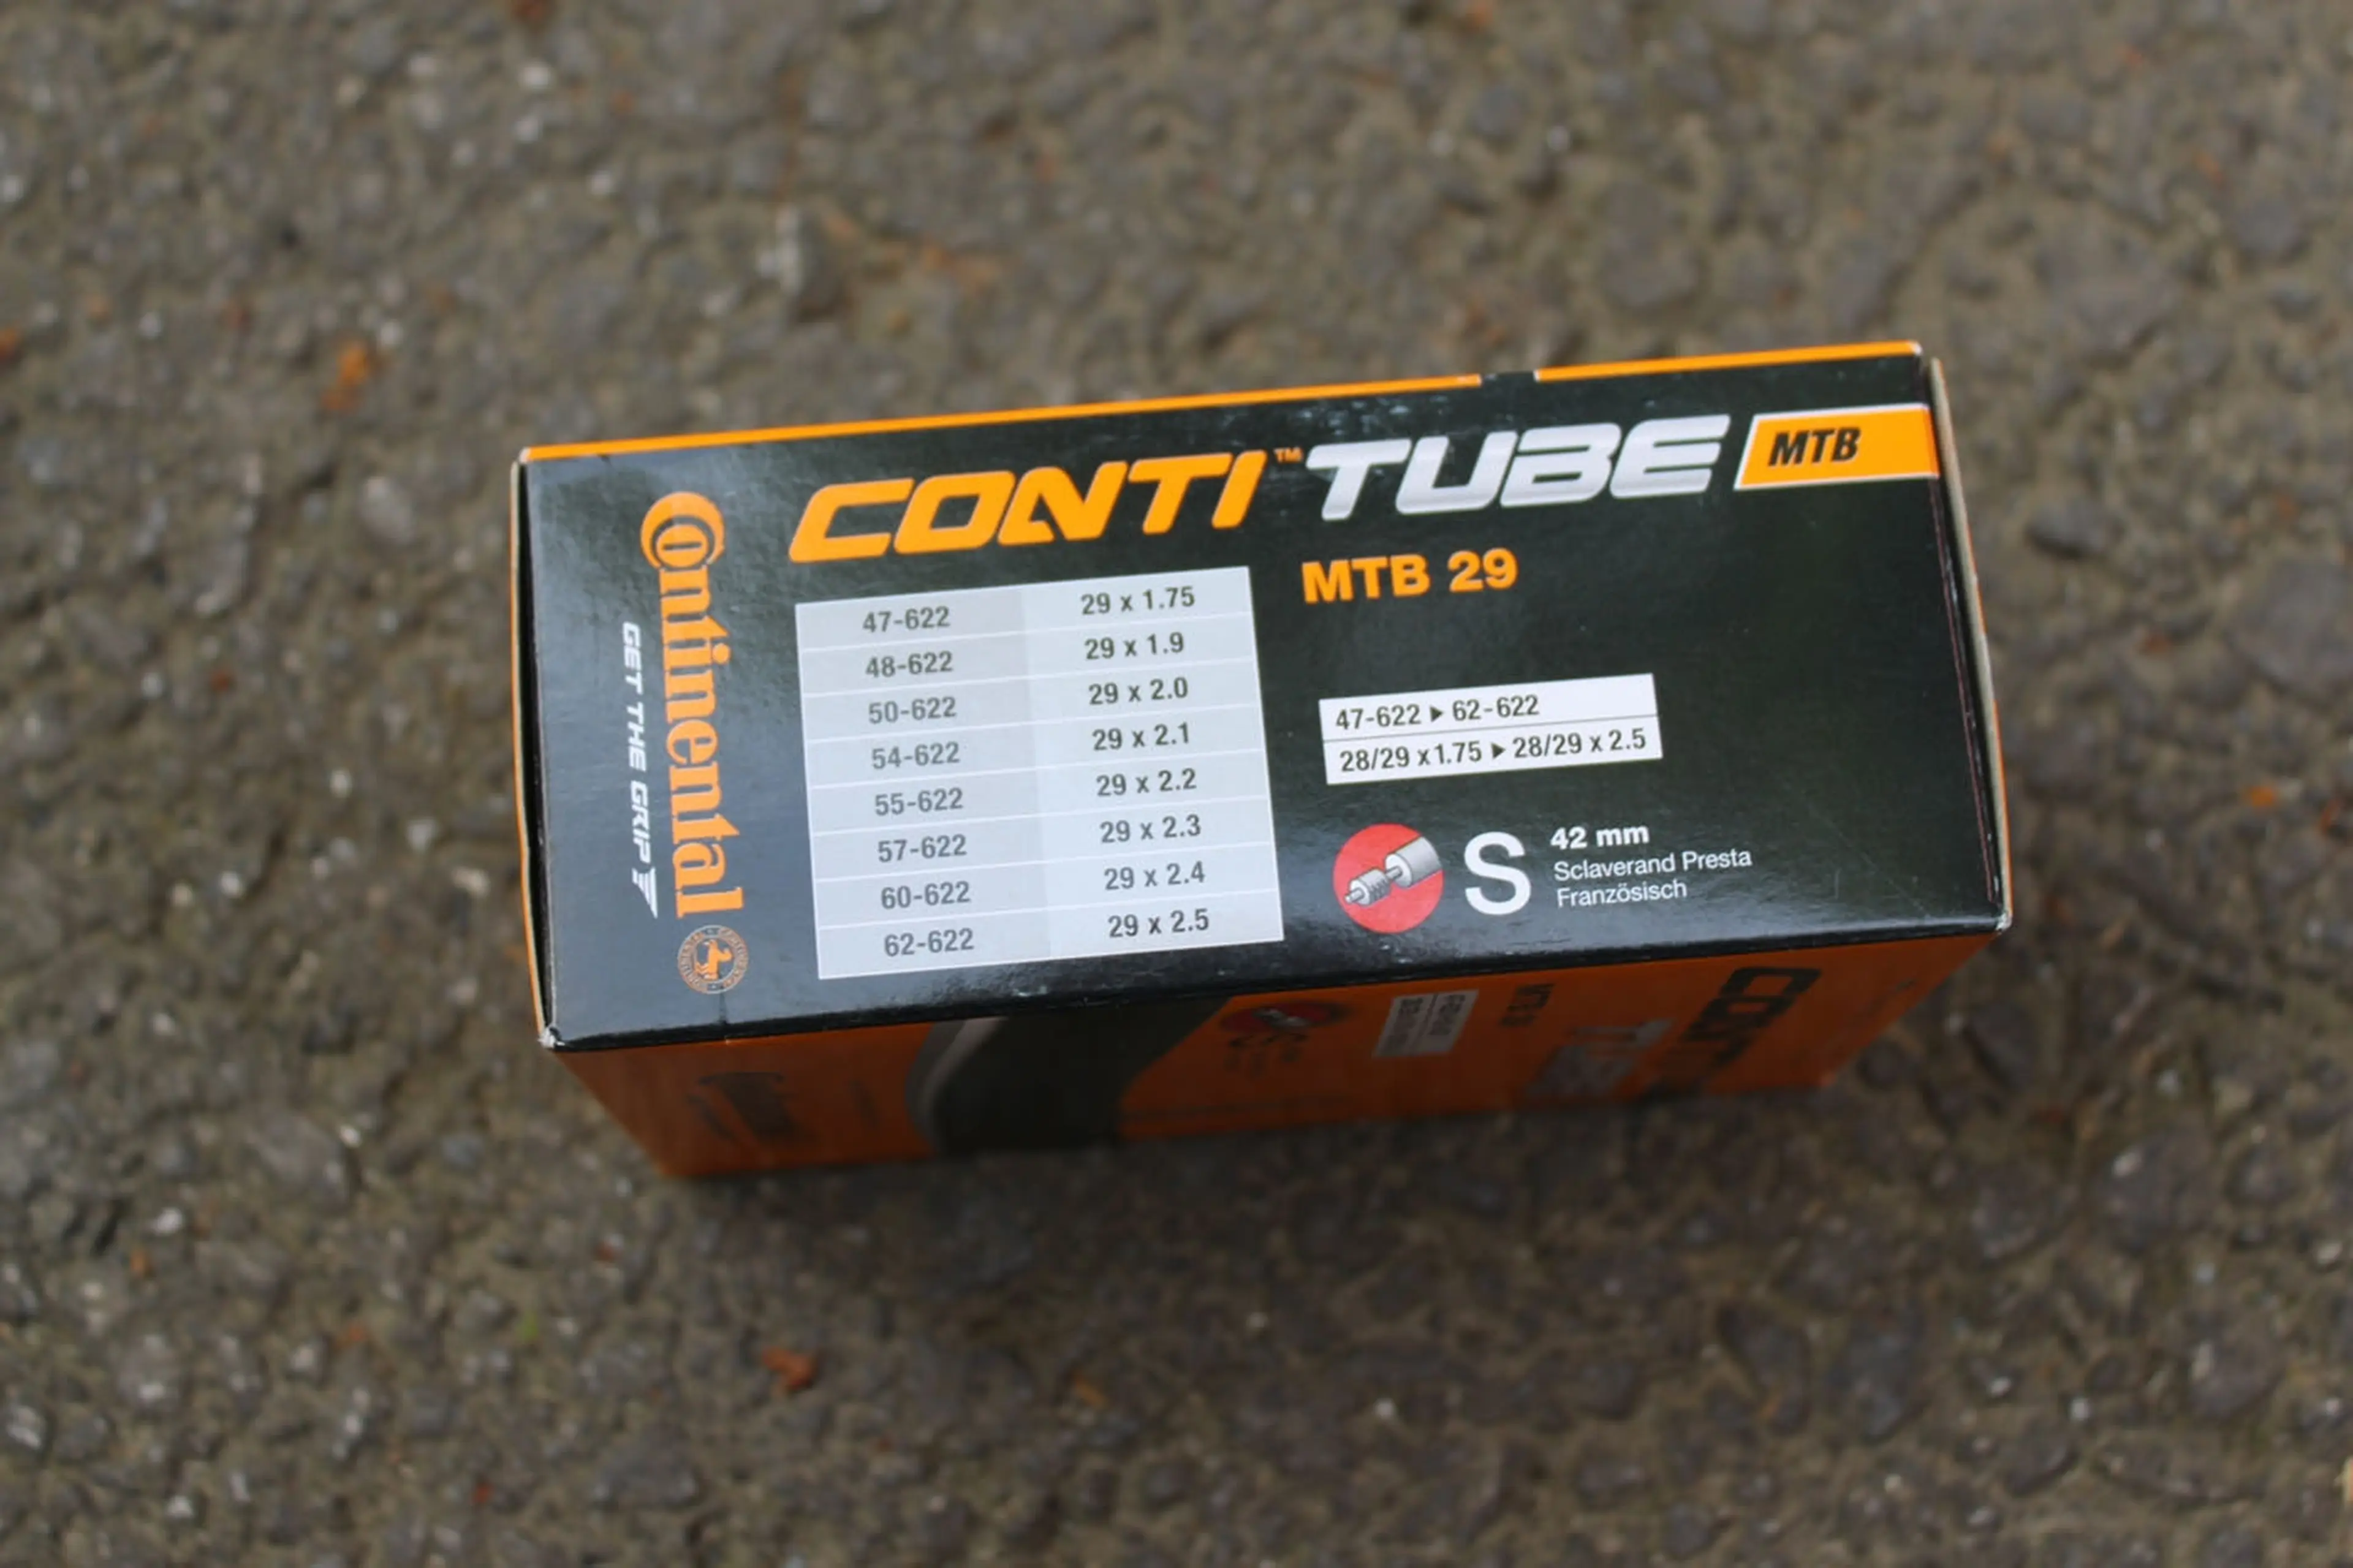 3. Continental Wide Tube 29x1.75-2.50 FV.